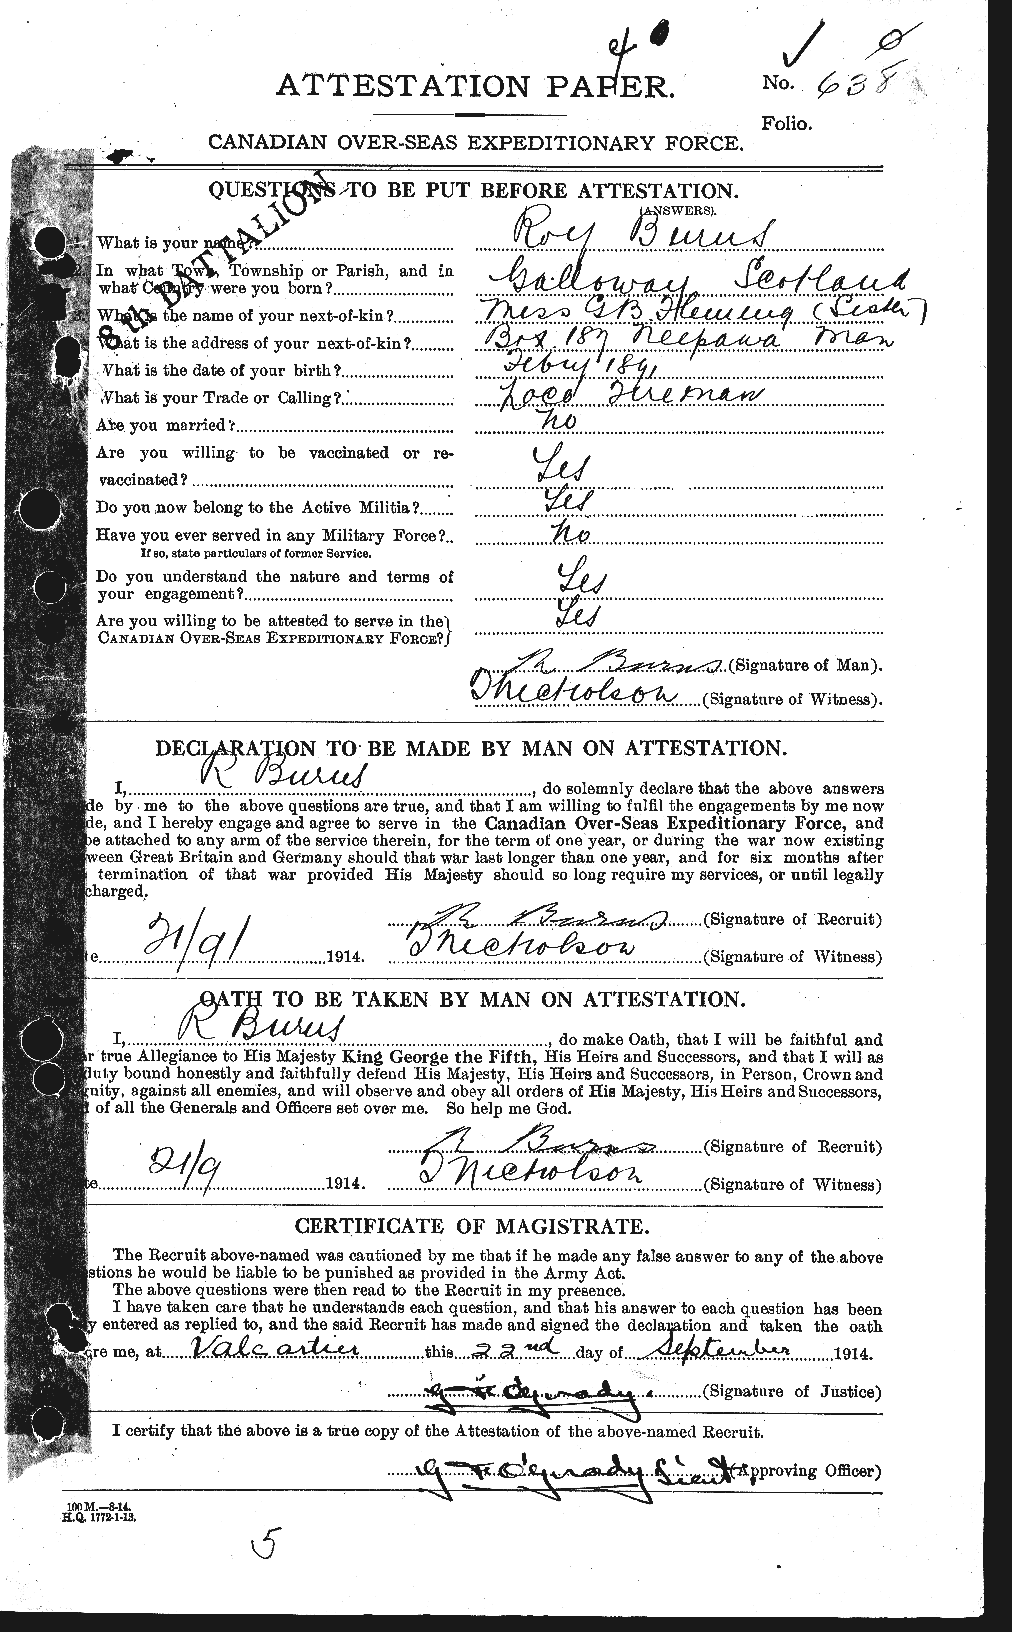 Personnel Records of the First World War - CEF 271739a